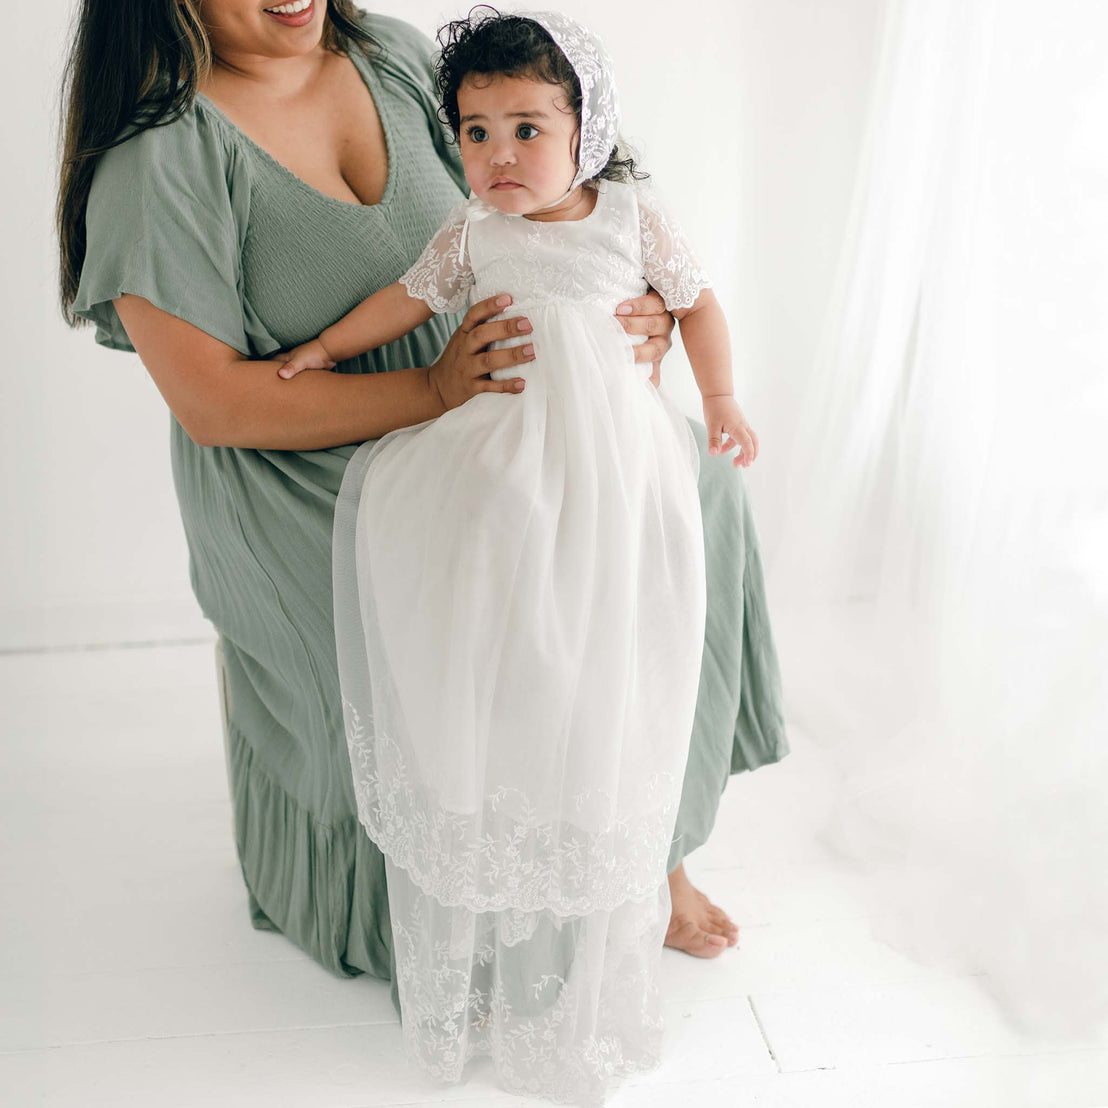 A woman in a green dress holds a baby wearing the Ella Christening Gown. The setting is a bright room with sheer white curtains. The woman is seated on a chair, smiling at the baby.